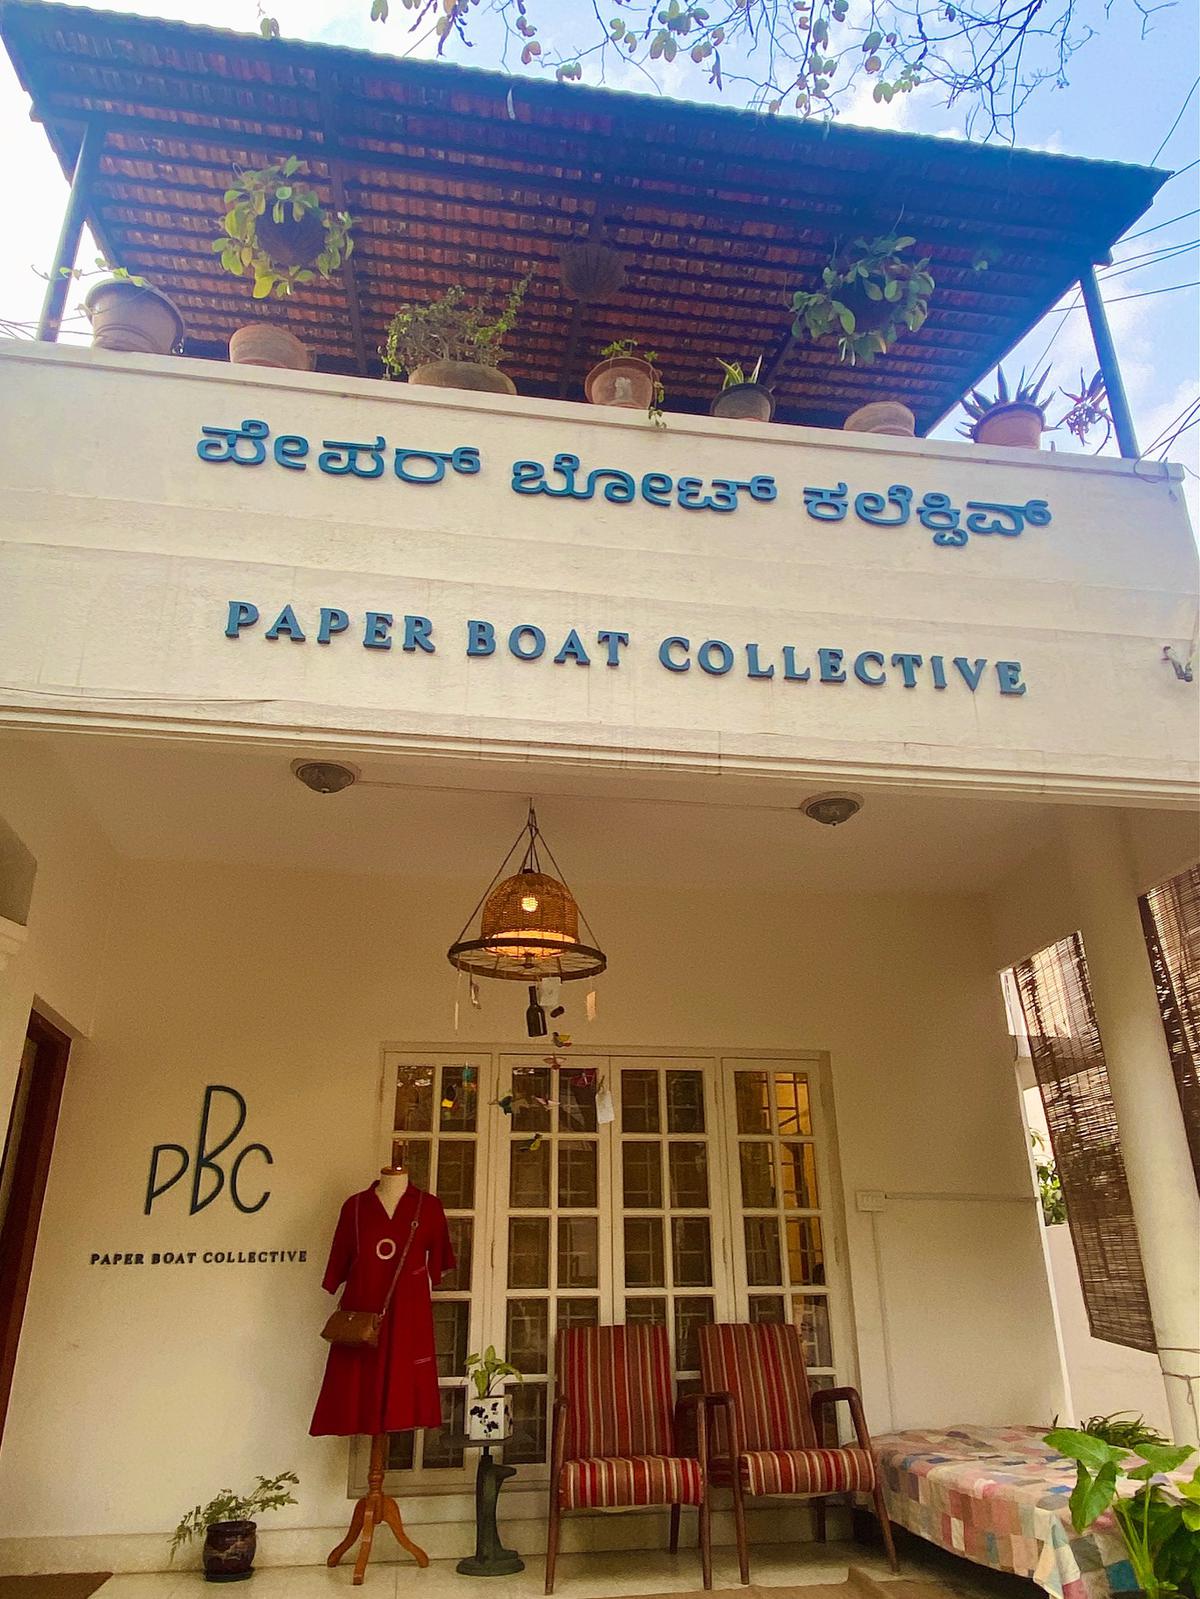  The Paper Boat Collective (PBC) is a concept store with environmental consciousness, ethics and mindful production at its core